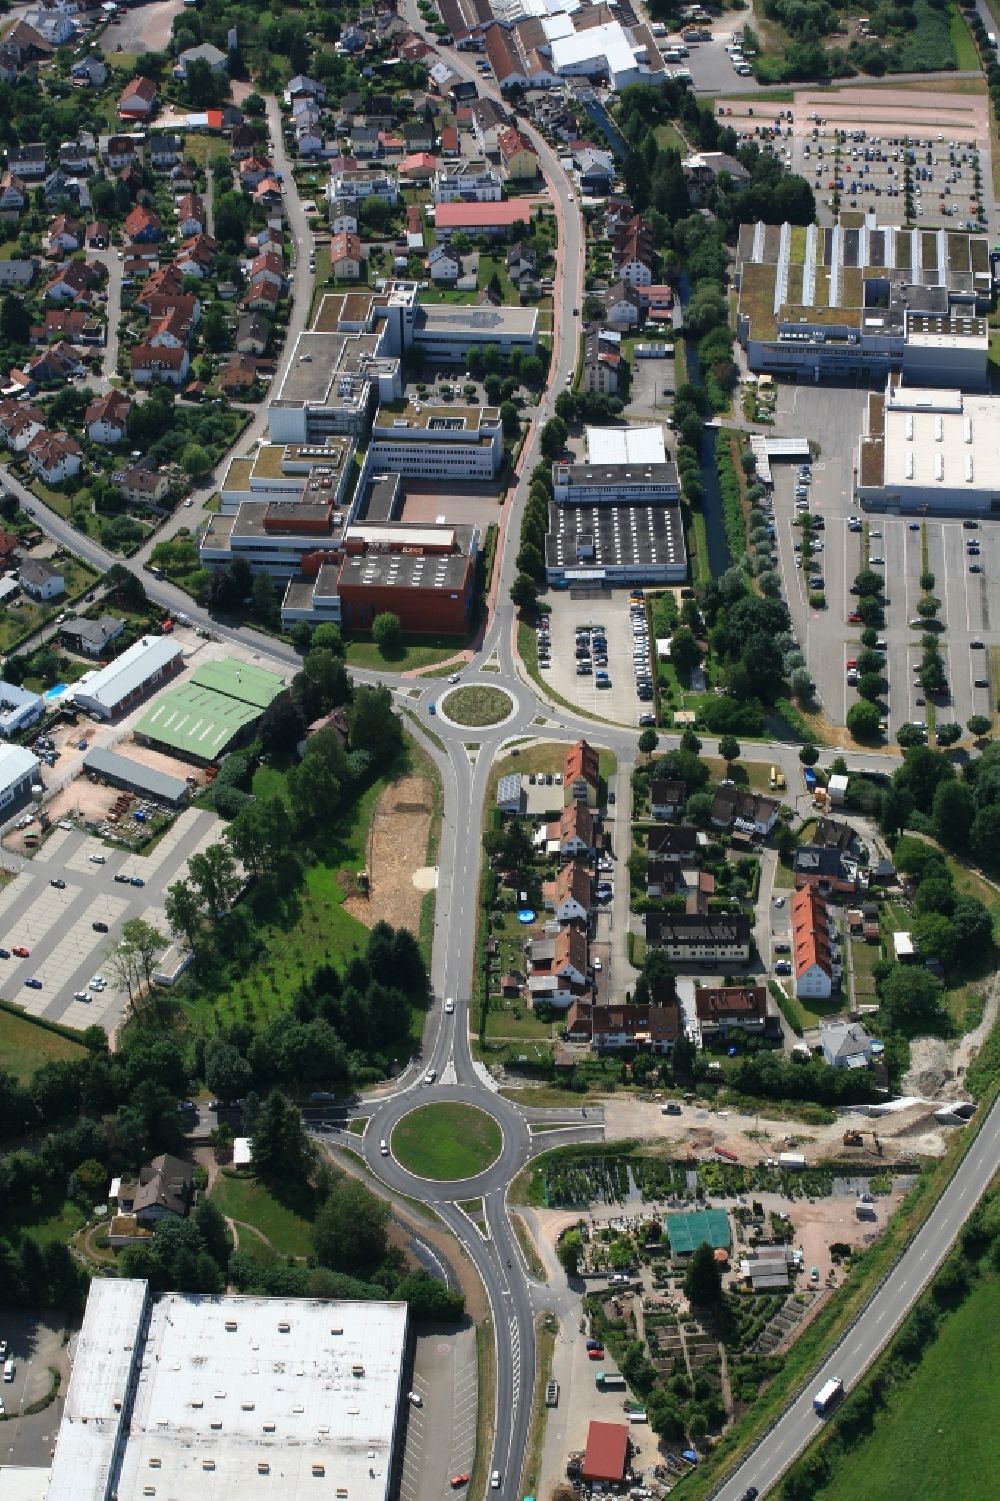 Aerial image Maulburg - Construction of the roundabout and road course for connection to the federal highway B317 in Maulburg in the state of Baden-Wuerttemberg